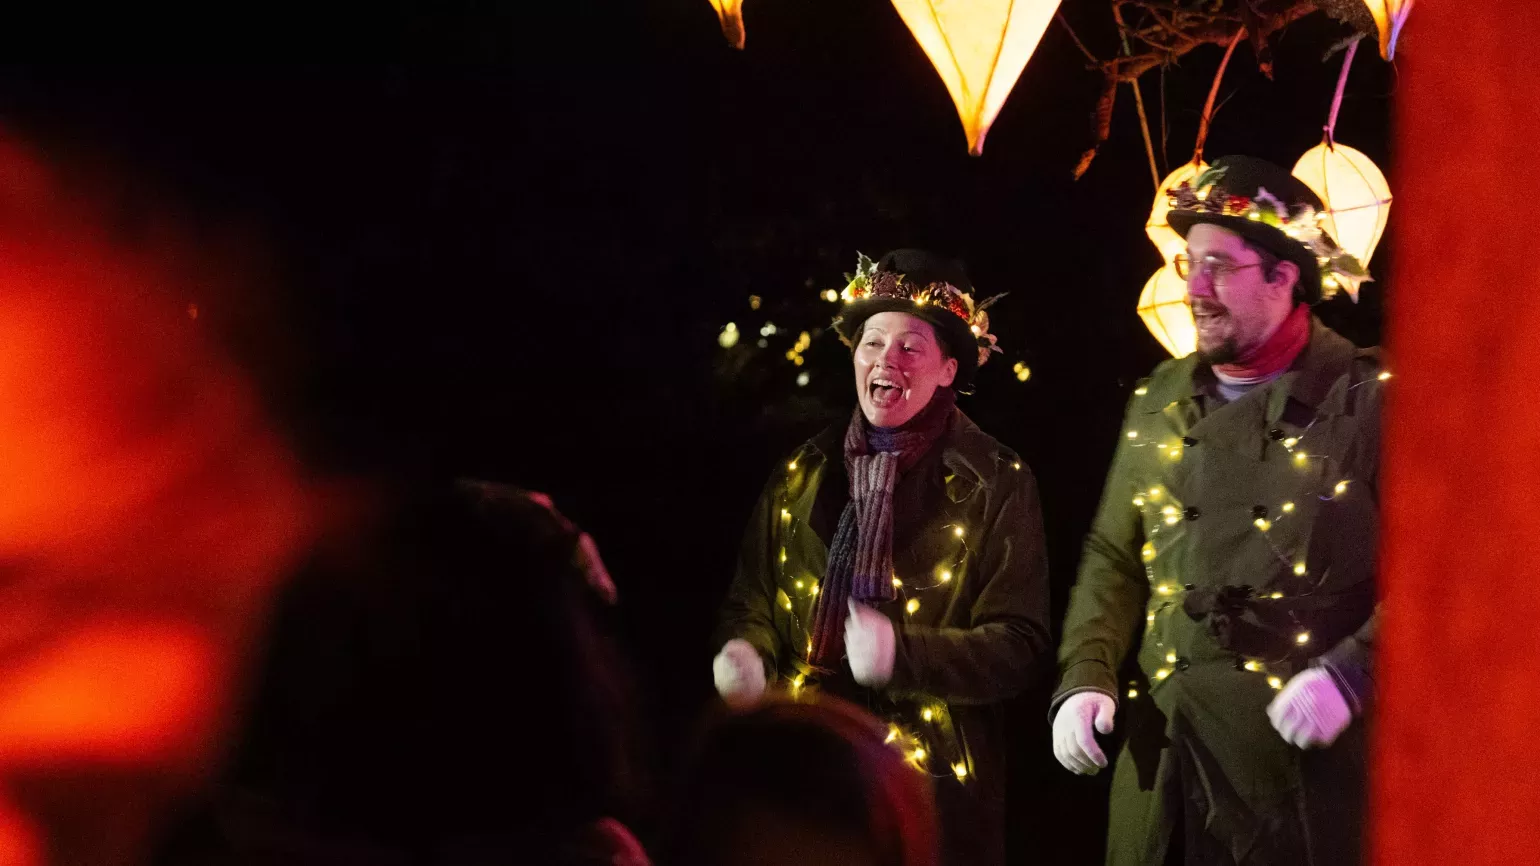 Two choral singers in old fashioned trench coats and bowler hats, festooned with fairy lights